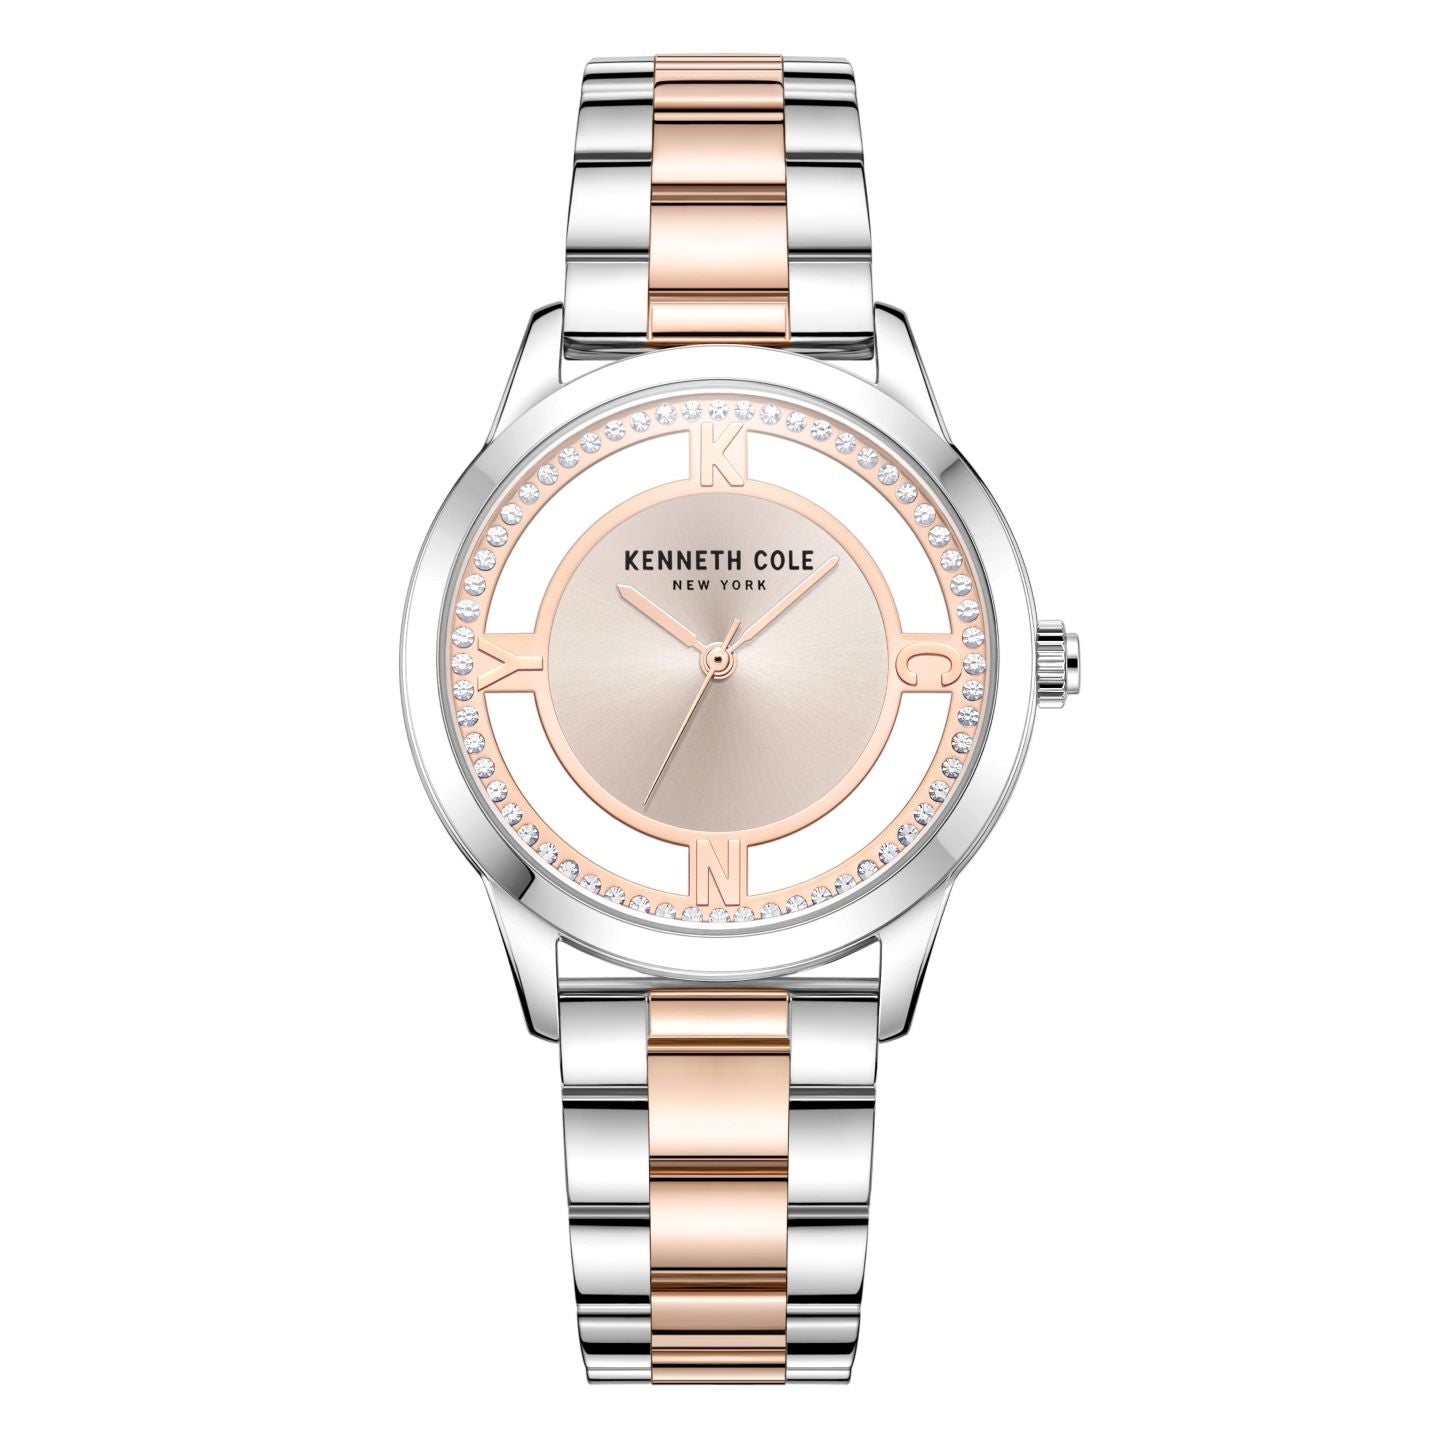 Kenneth Cole New York - KCWLG2220102 - Stainless Steel Wrist Watch for Women - Silver & Rose Gold